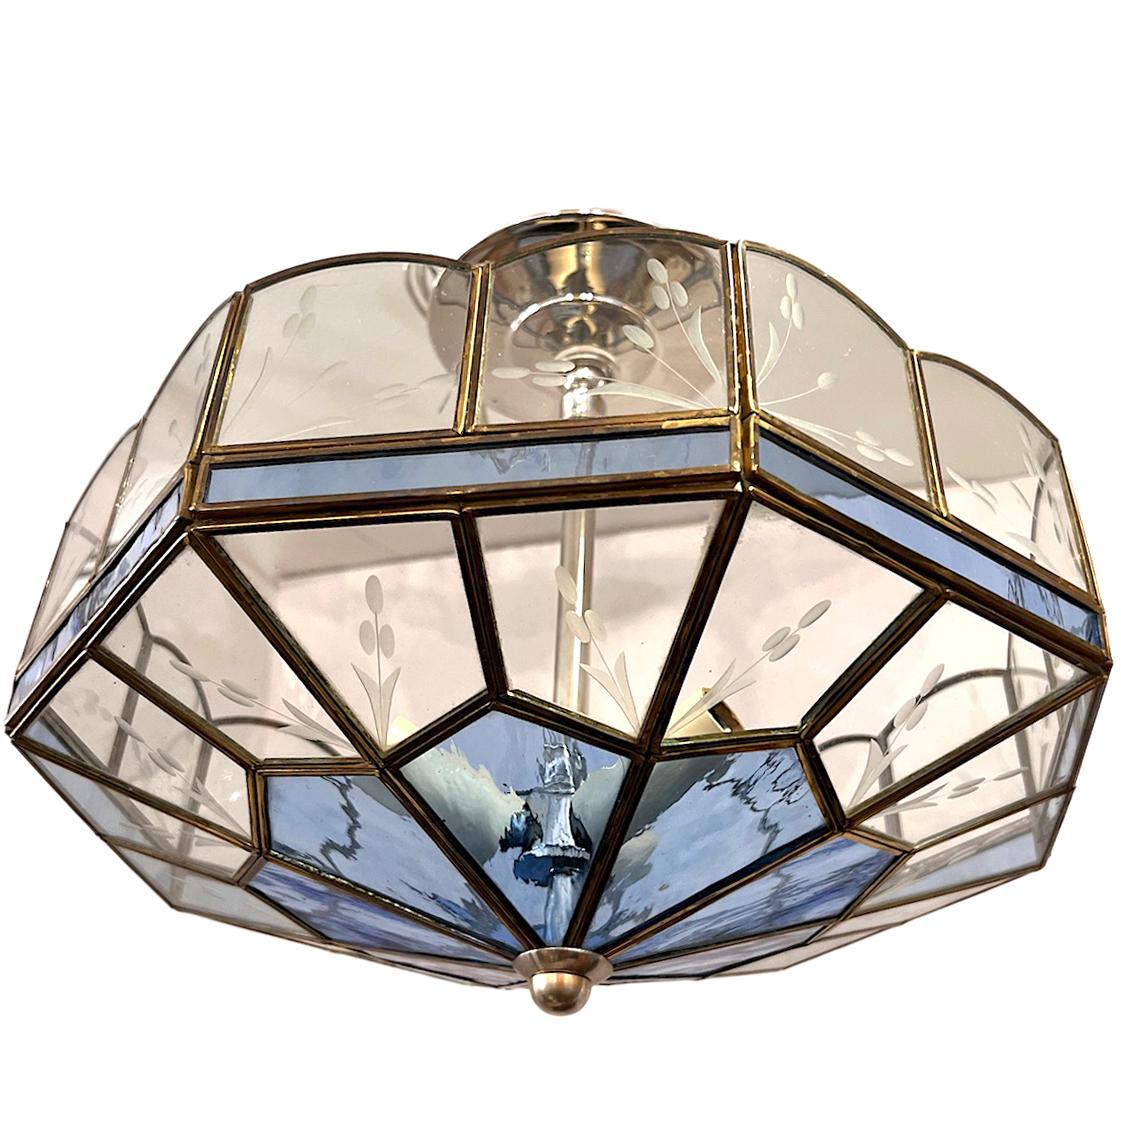 A circa 1950's English leaded glass light fixture with 3 interior candelabra lights.

Measurements:
drop: 11